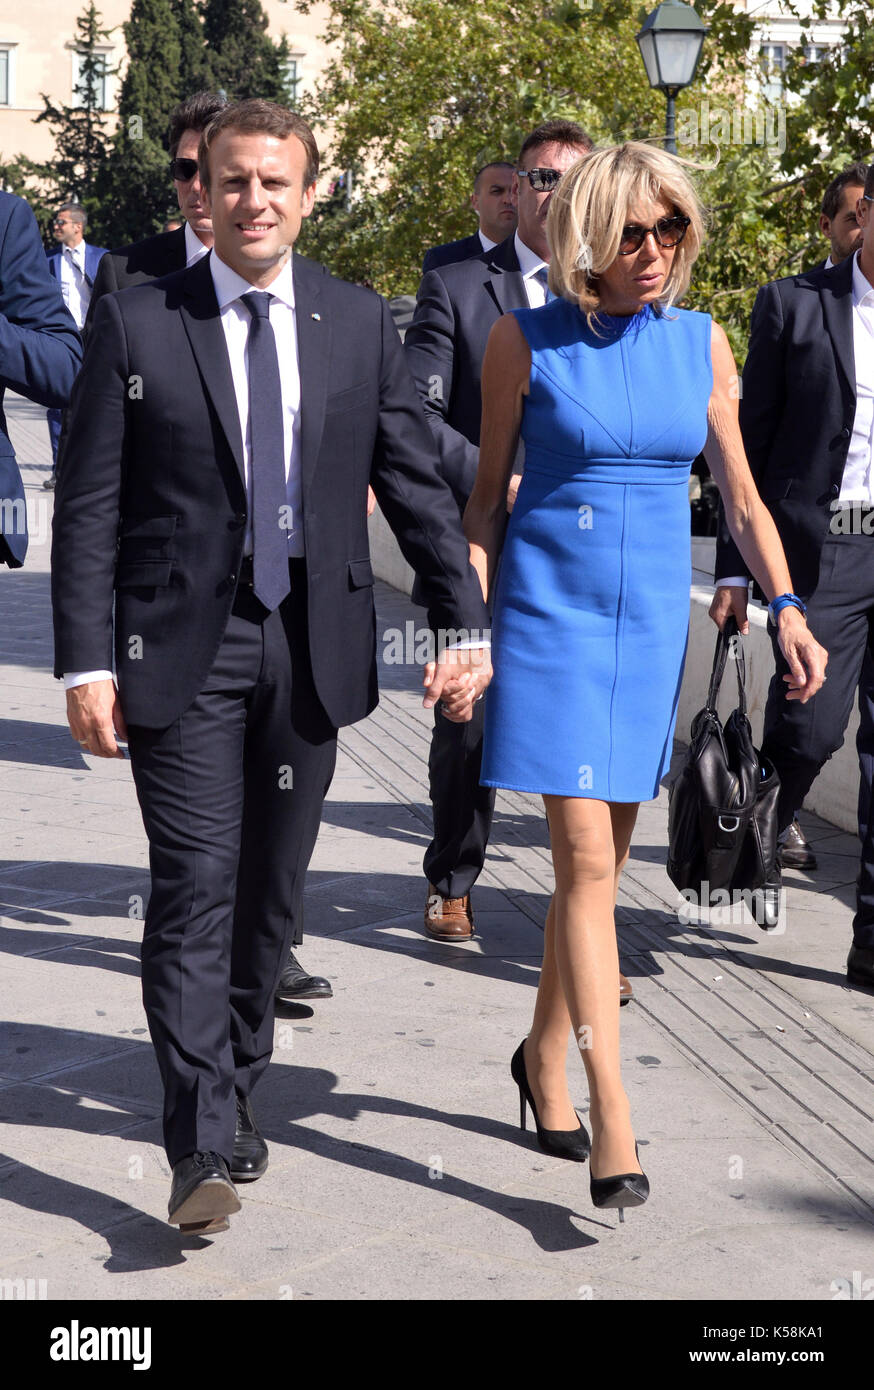 Athens, Greece. 08 Sep., 2017. French President Emmanuel Makron (L) walks hand by hand with his wife Brigitte Makron in Syntagma square, central Athens, Greece, 08 September 2017, accompanied by his bodyguards. Makron came to Greece on a two-day official visit. ©Elias Verdi/Alamy Live News Stock Photo